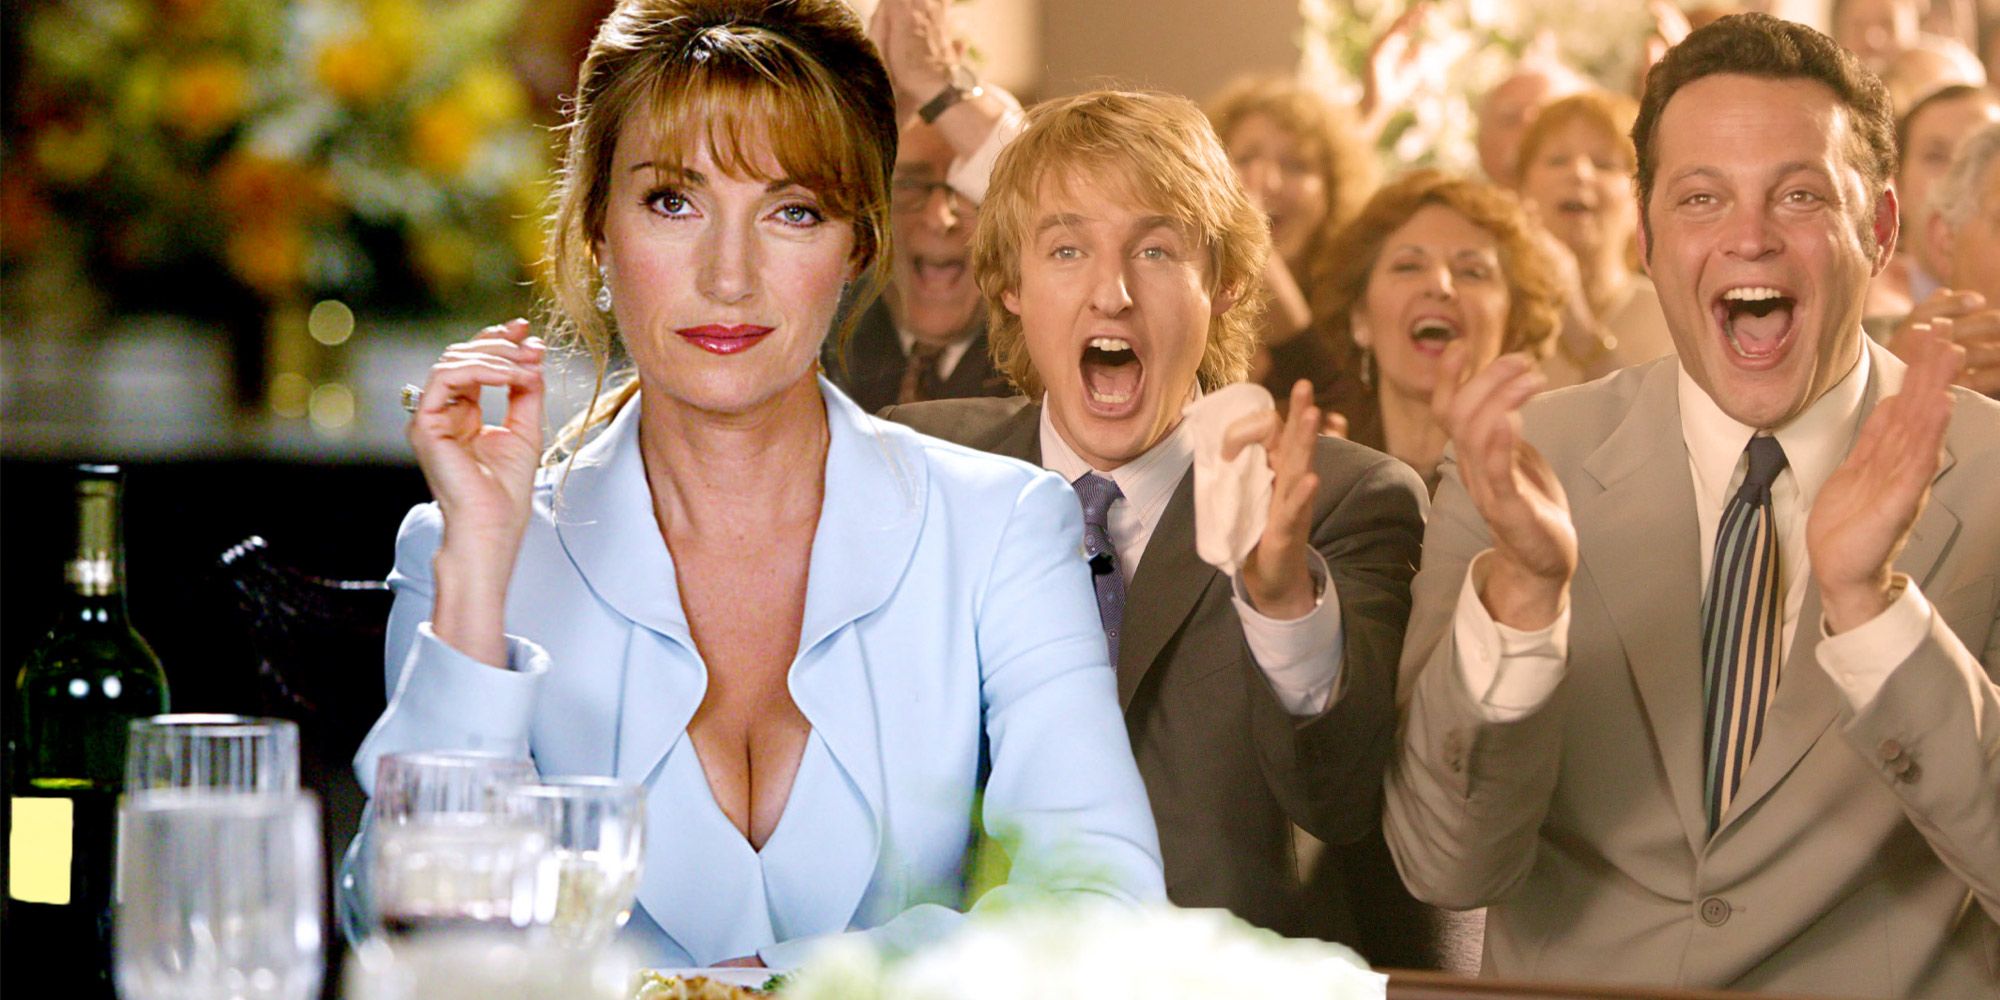 ben snape recommends Wedding Crashers Breast Montage